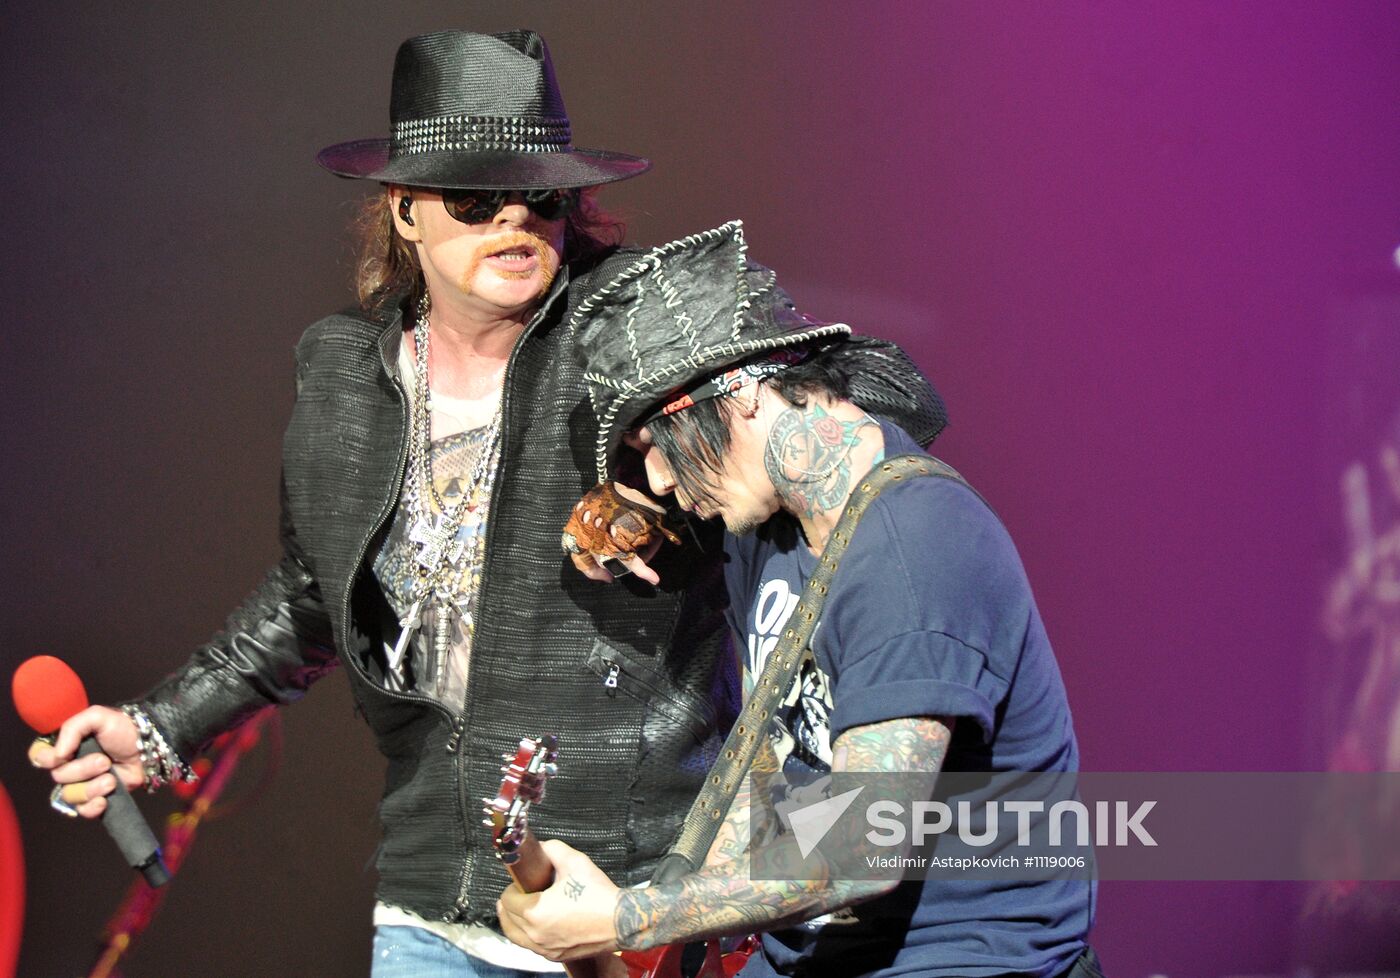 Guns N'Roses give a concert in Moscow